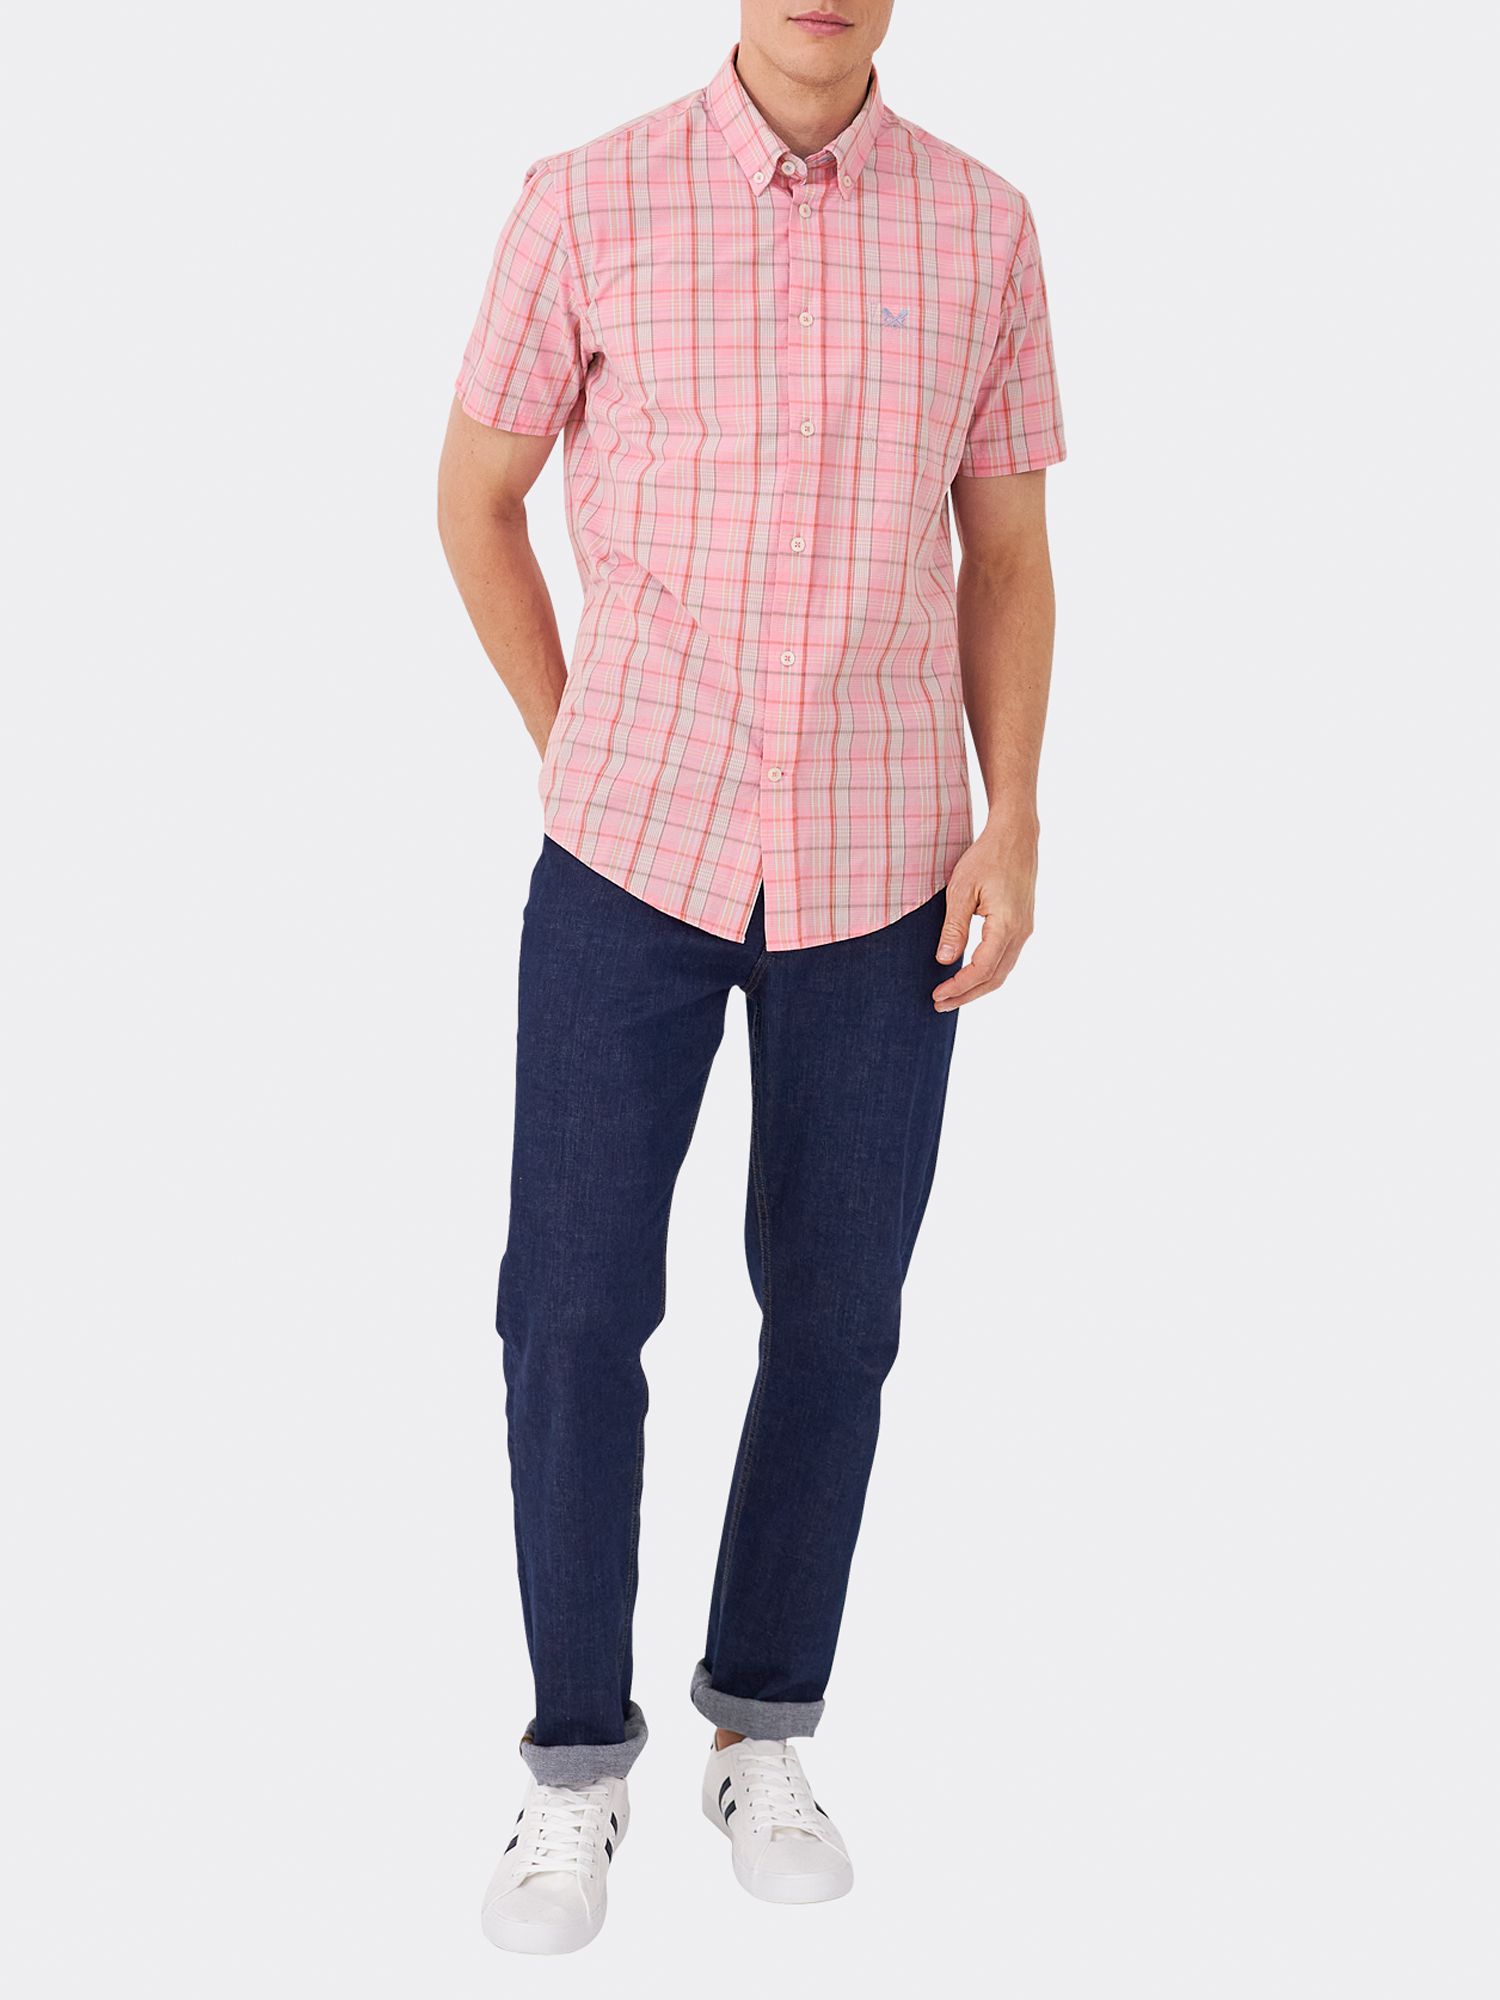 Crew Clothing Dulwich Check Short Sleeve Shirt, Pink